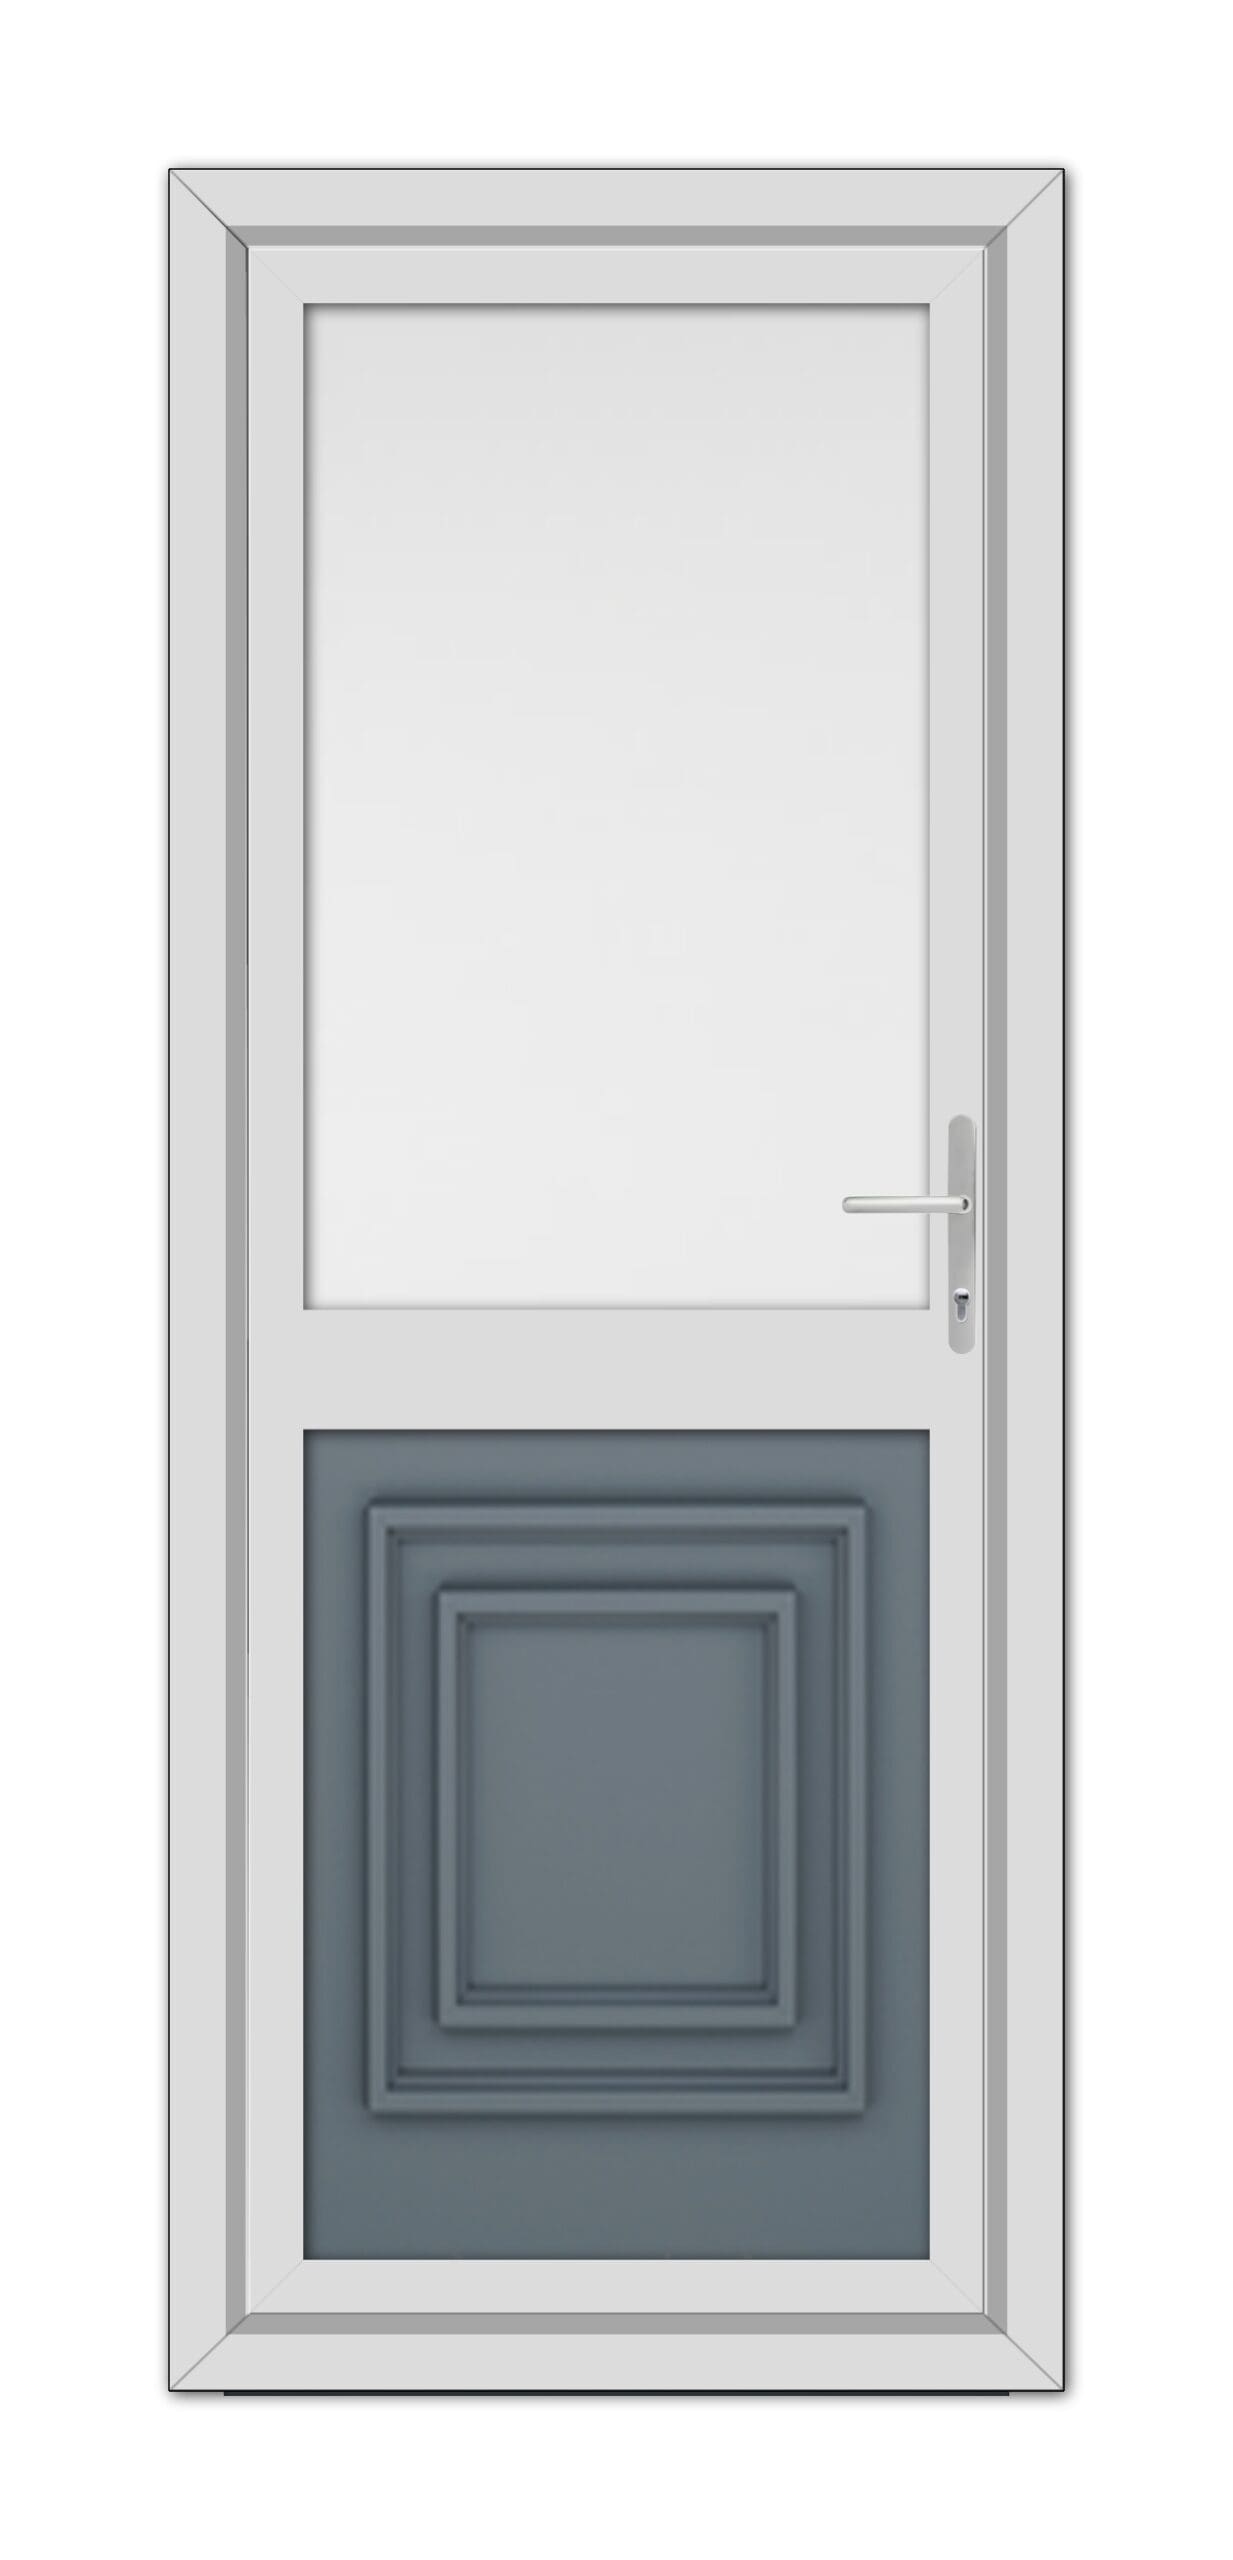 A modern white door with a Slate Grey Hannover Half uPVC Back Door lower panel and a small, transparent window at the top, featuring a silver handle on the right side.